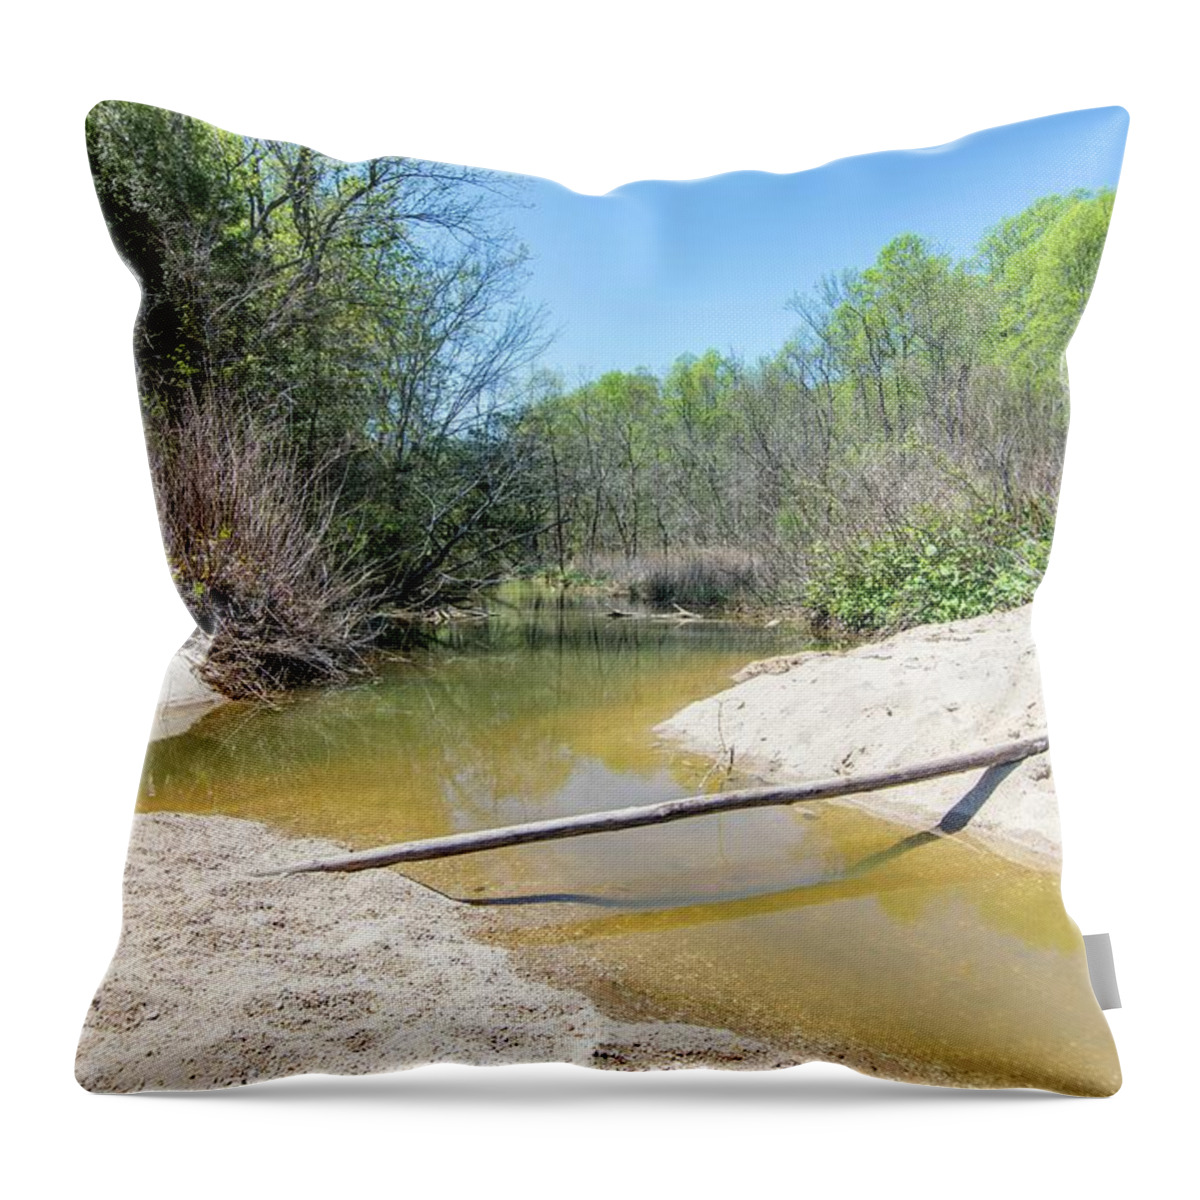 Landscape Throw Pillow featuring the photograph Chesapeake Tributary by Charles Kraus